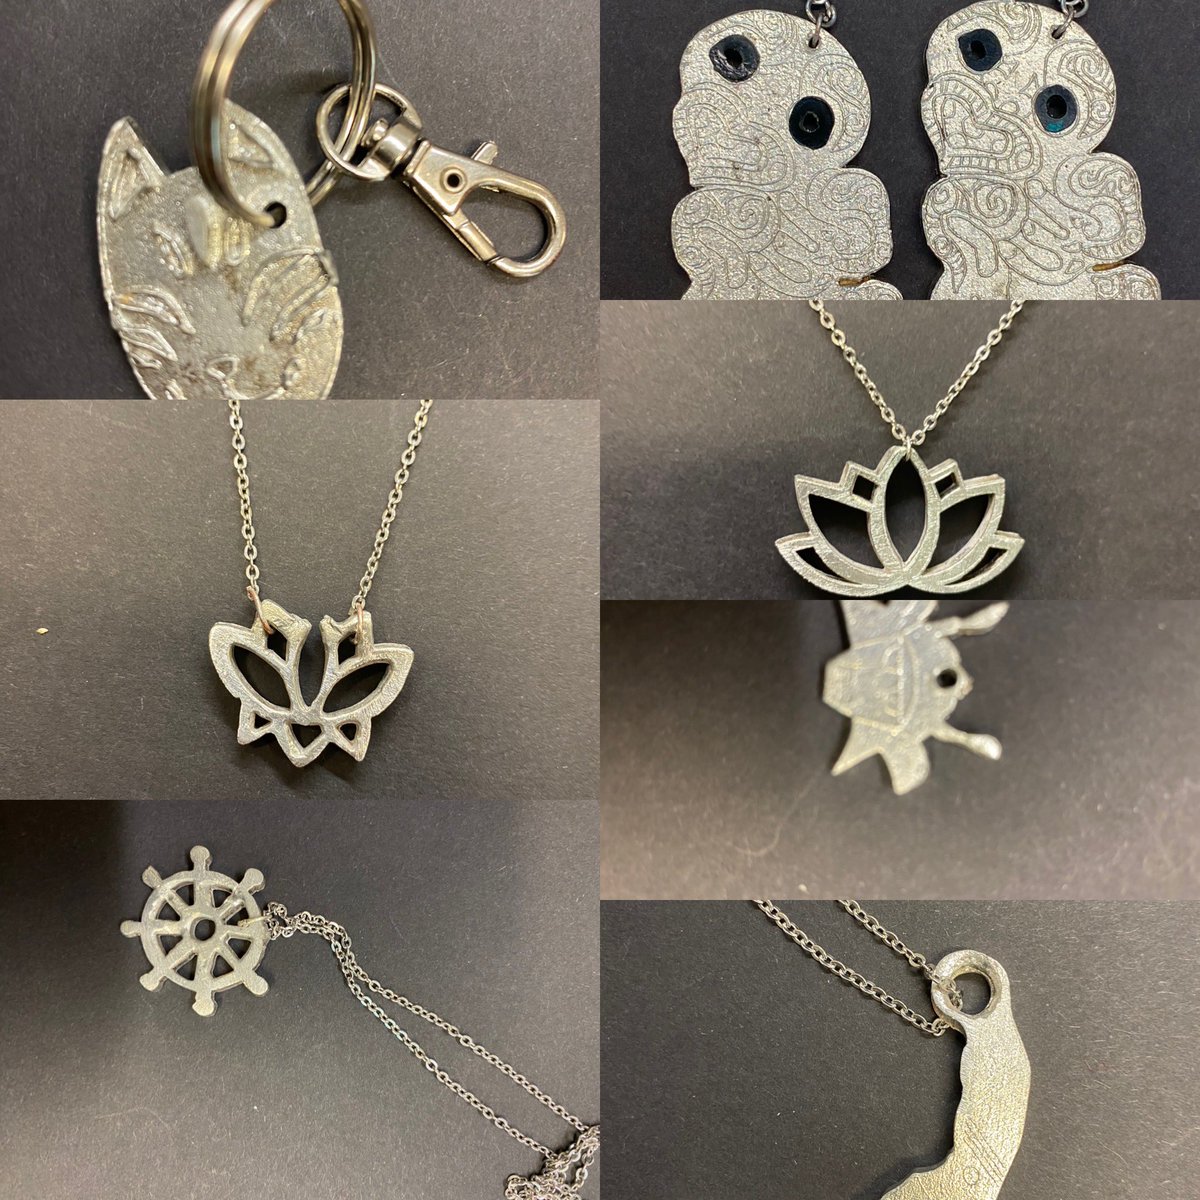 Some examples of #R14 pewter casting work. So lovely to see such varied ideas and experiments with texture and acrylic inlays. #SJCDT